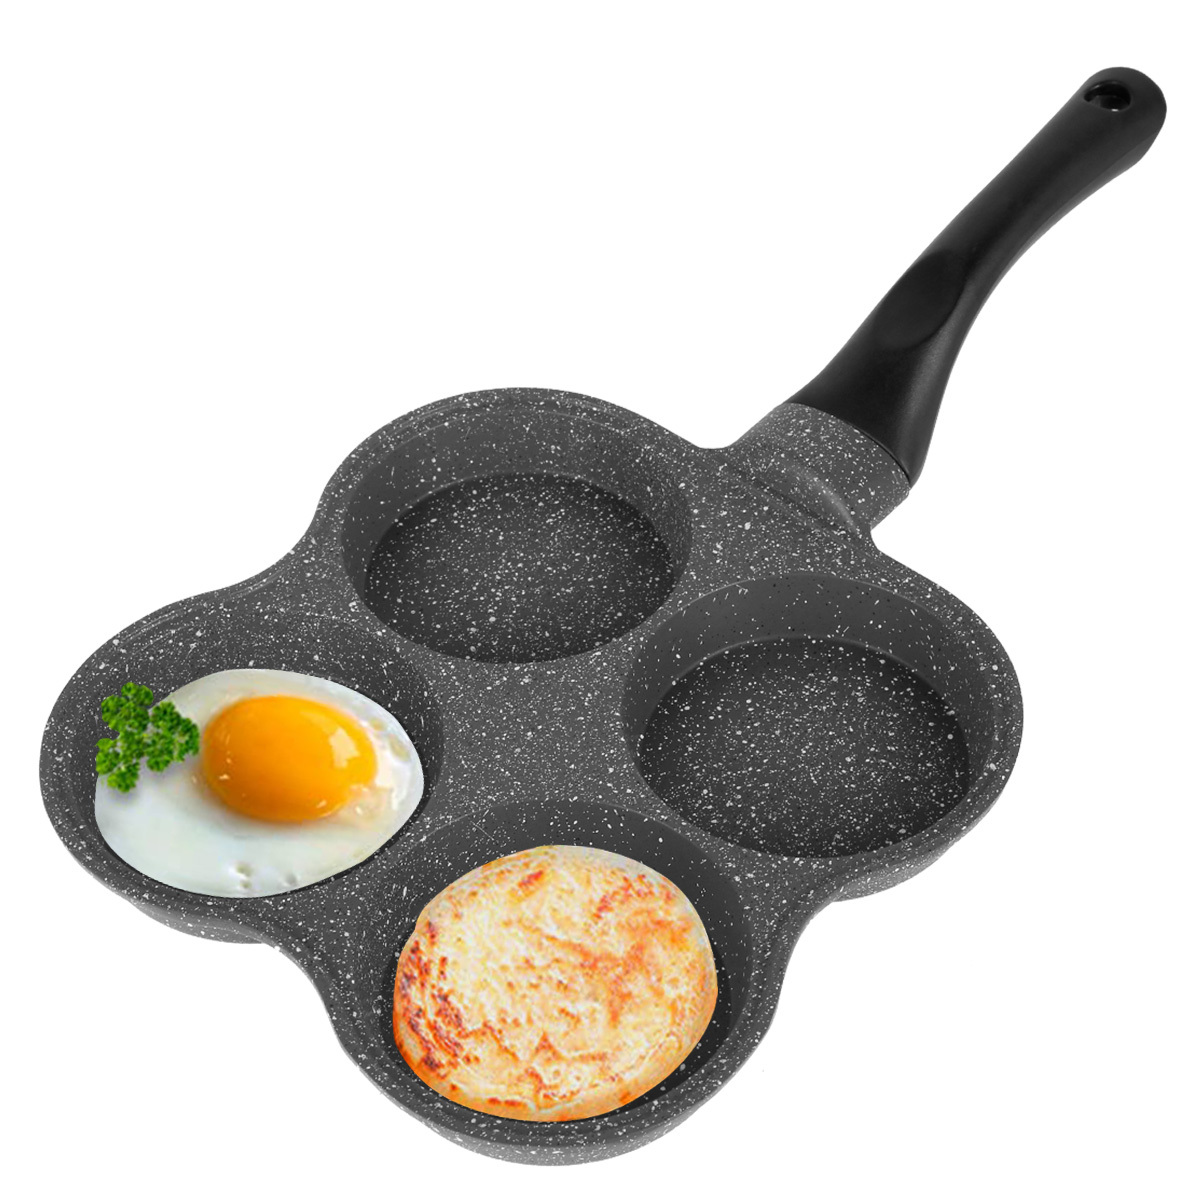 Egg Frying Pan - 7 Hole Non Stick Omelette Pan,Easy Clean Multi Egg Cooking  Pan Aluminum Egg Pan Skillet for Breakfast Sandwiches Meat Pan,Compatible